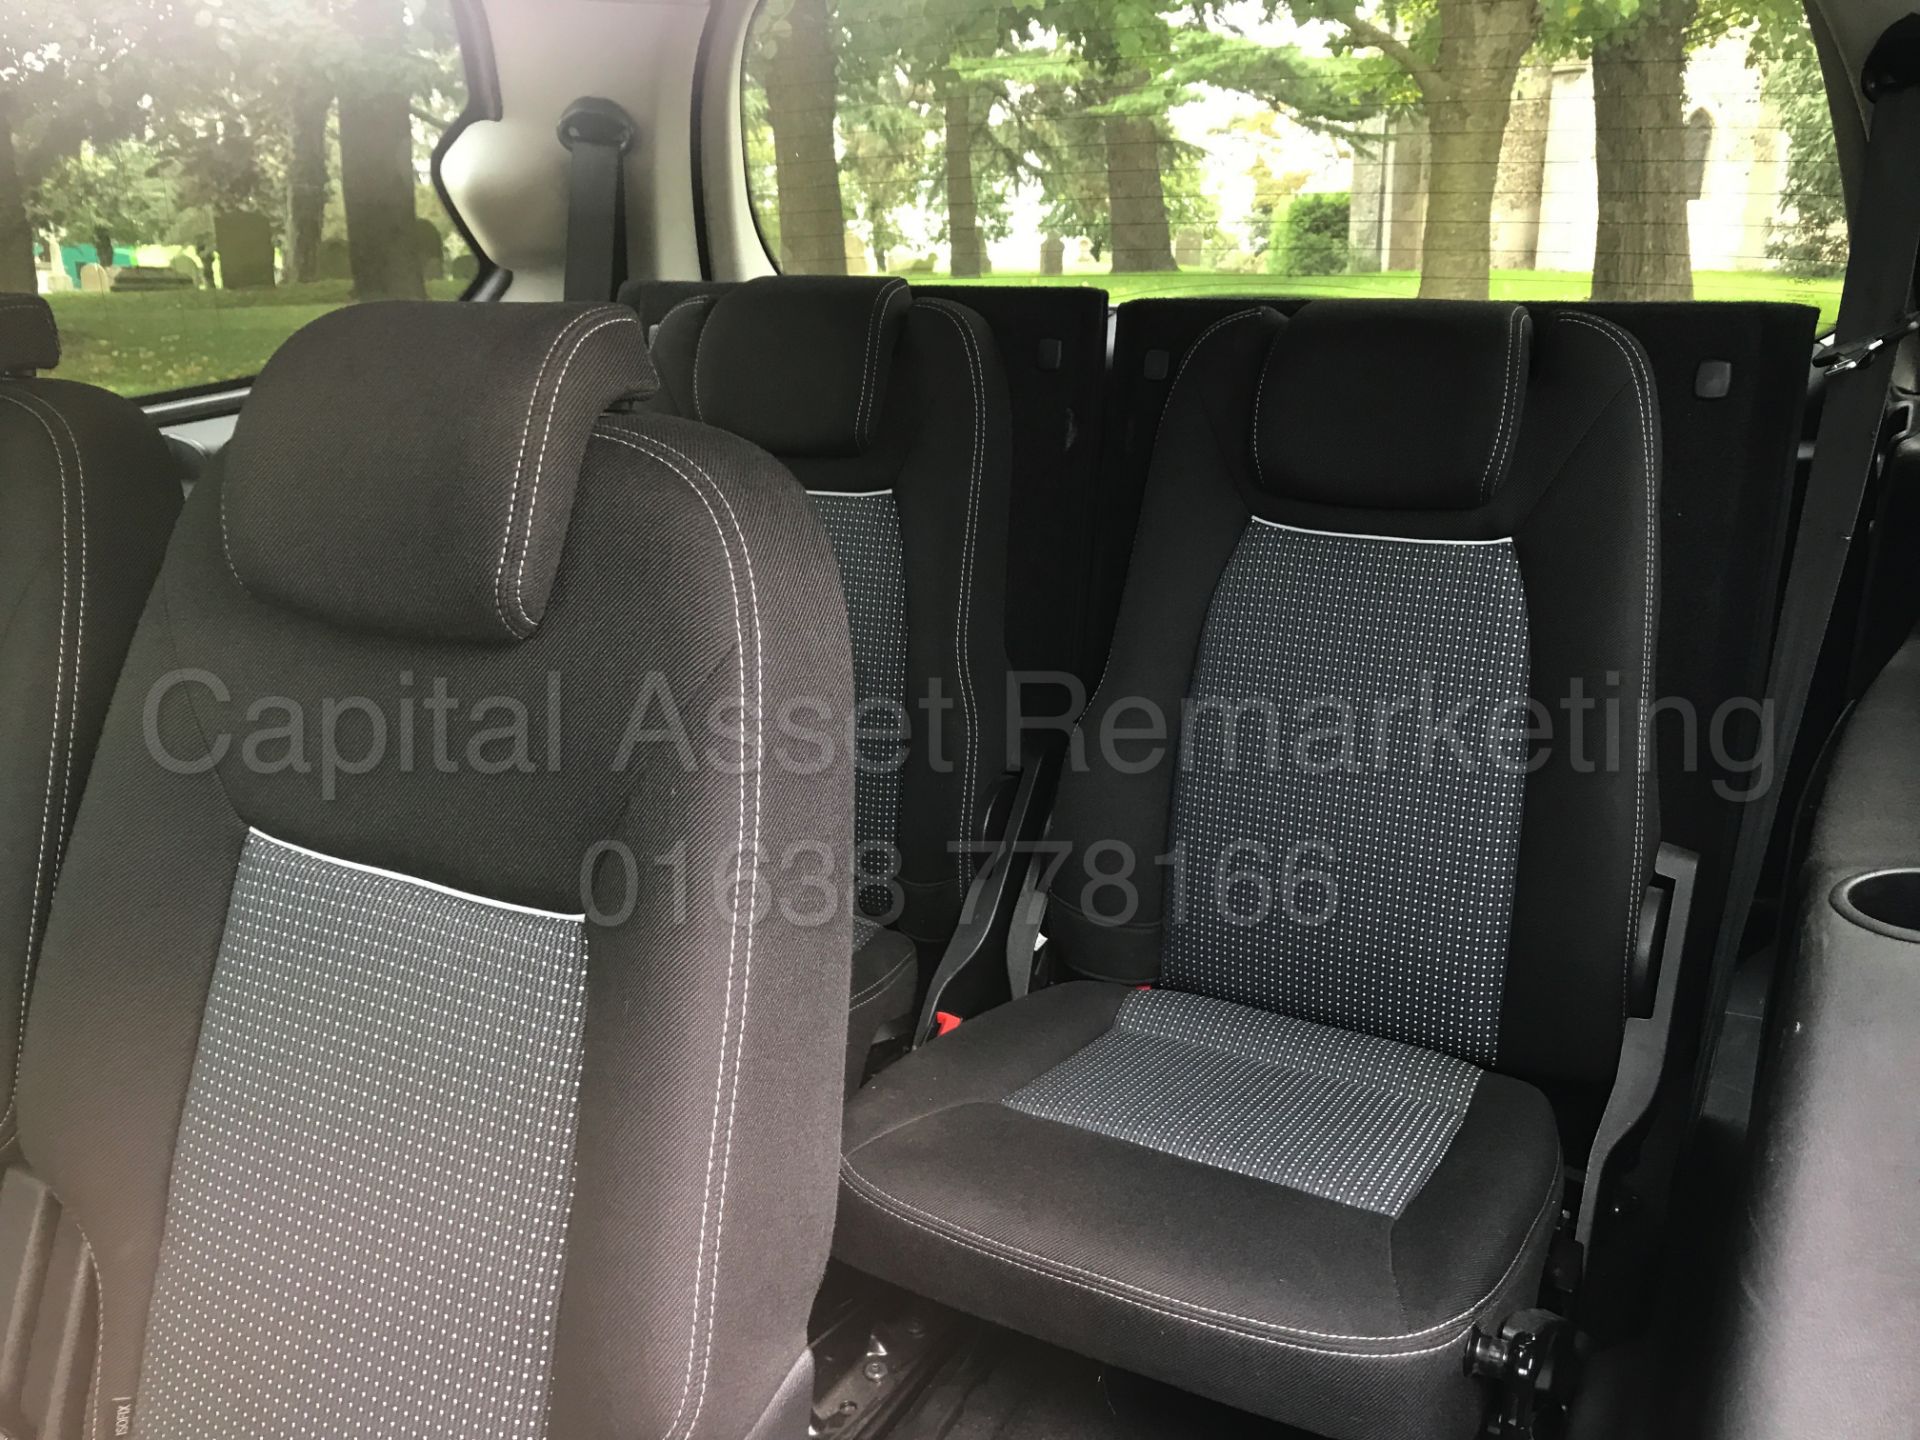 FORD GALAXY 'ZETEC' 7 SEATER MPV (2014 MODEL) '2.0 TDCI - 140 BHP - POWER SHIFT' (1 OWNER FROM NEW) - Image 15 of 27